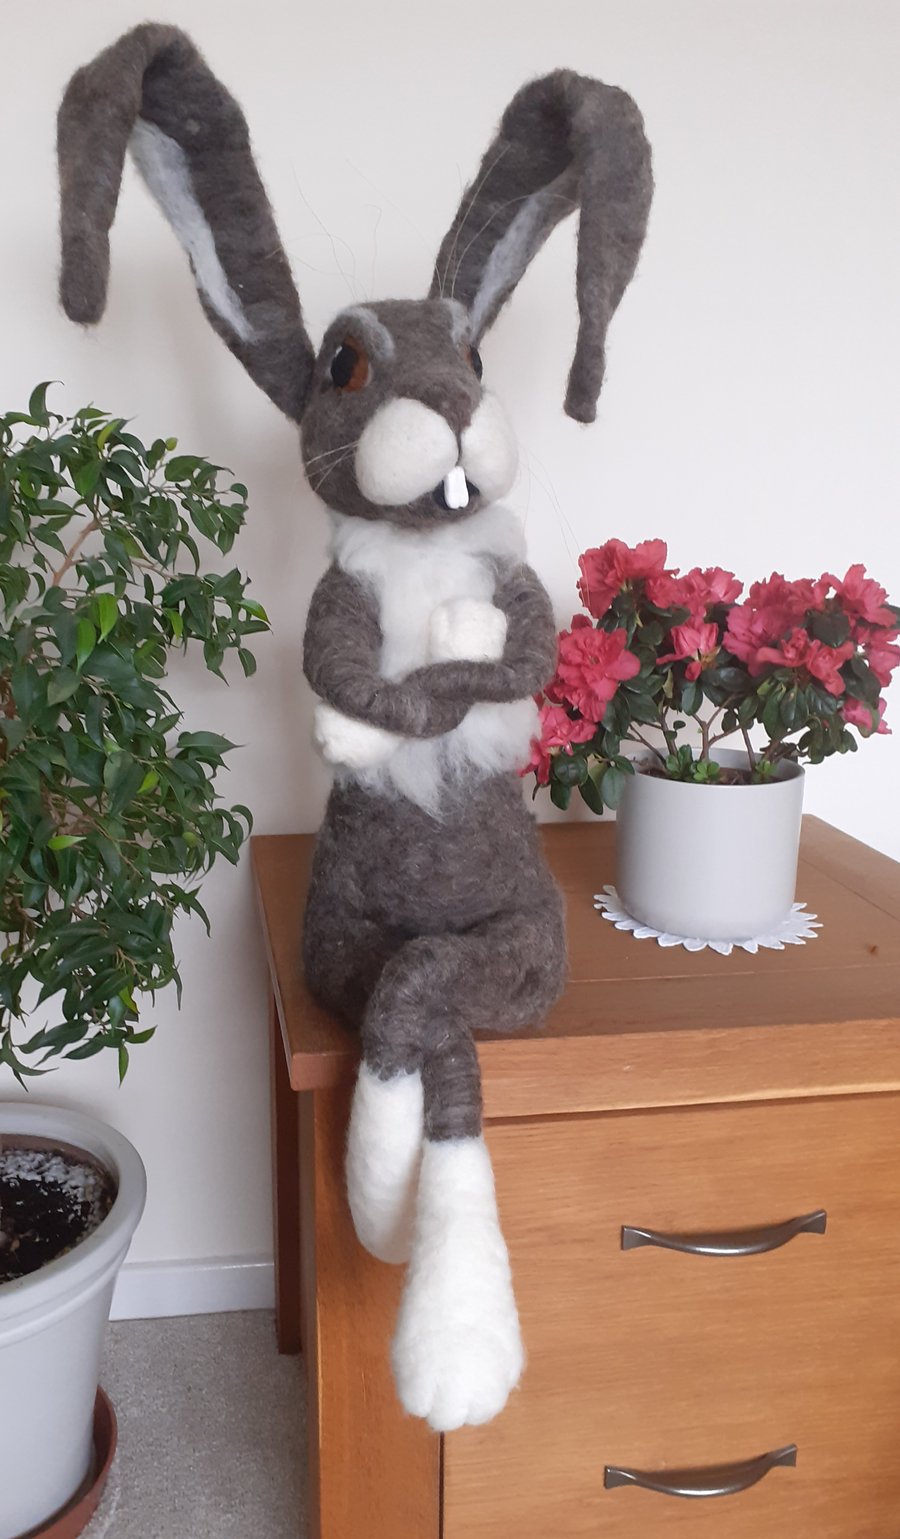 SOLD Henry Hare, needle felted wool sculpture ooak,collectable 